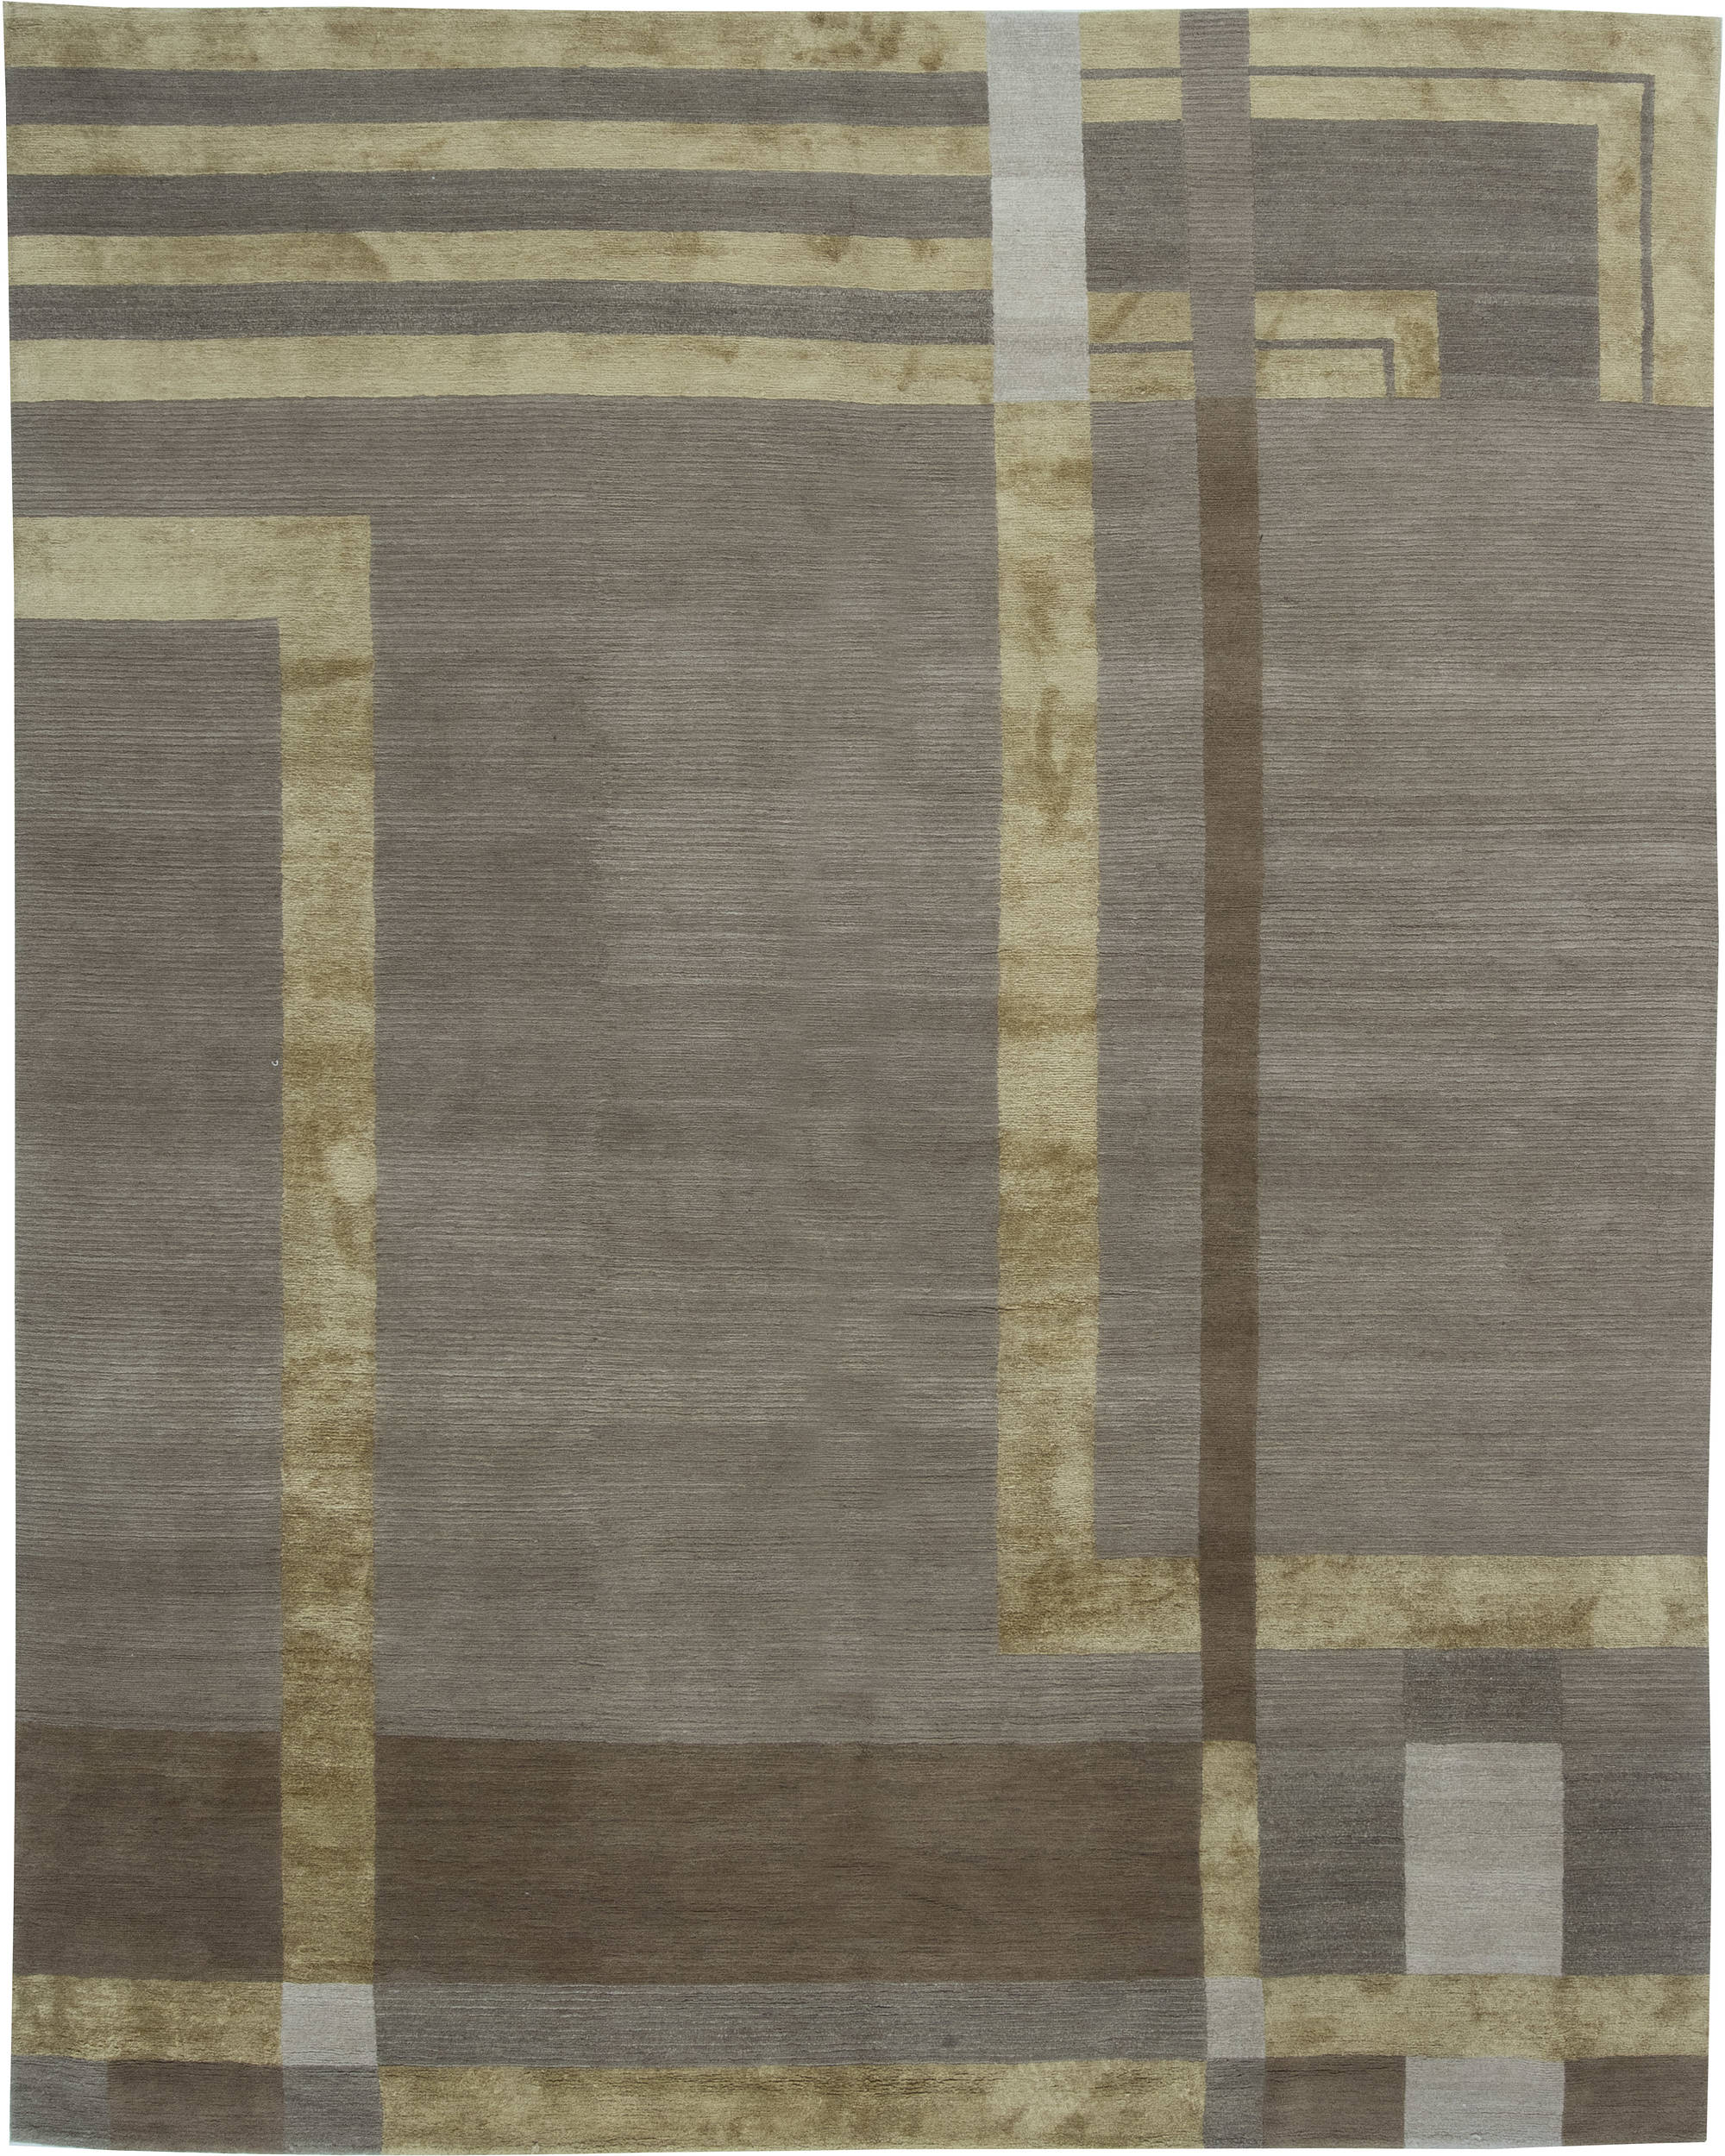 Contemporary Nepalese Rug N11506 by DLB